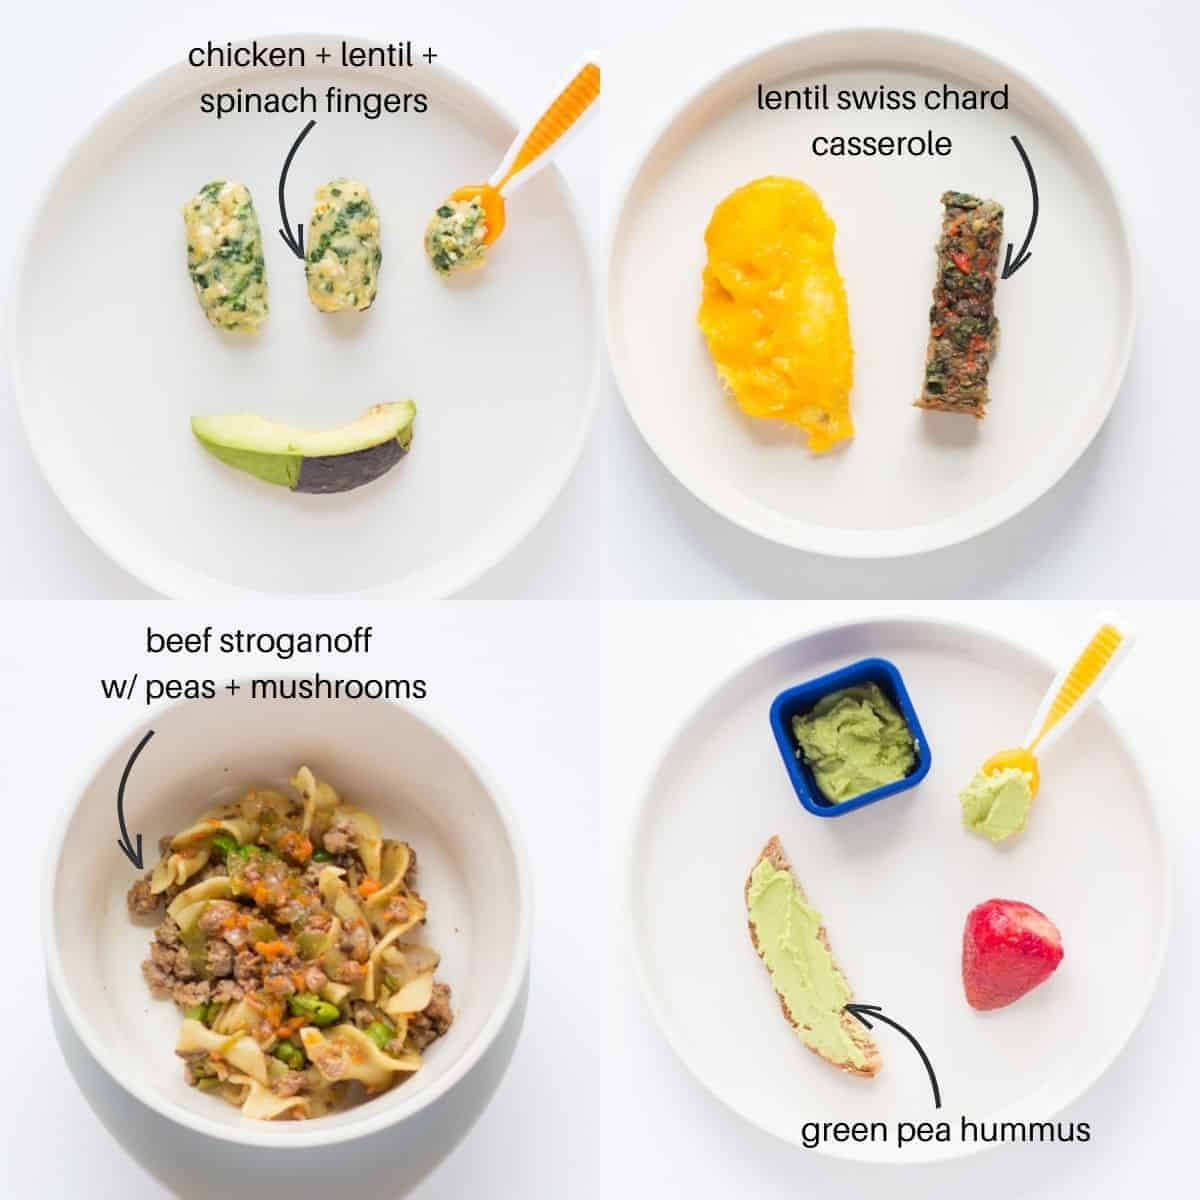 four iron rich vegetable meals for babies, including spinach, swiss chard, peas